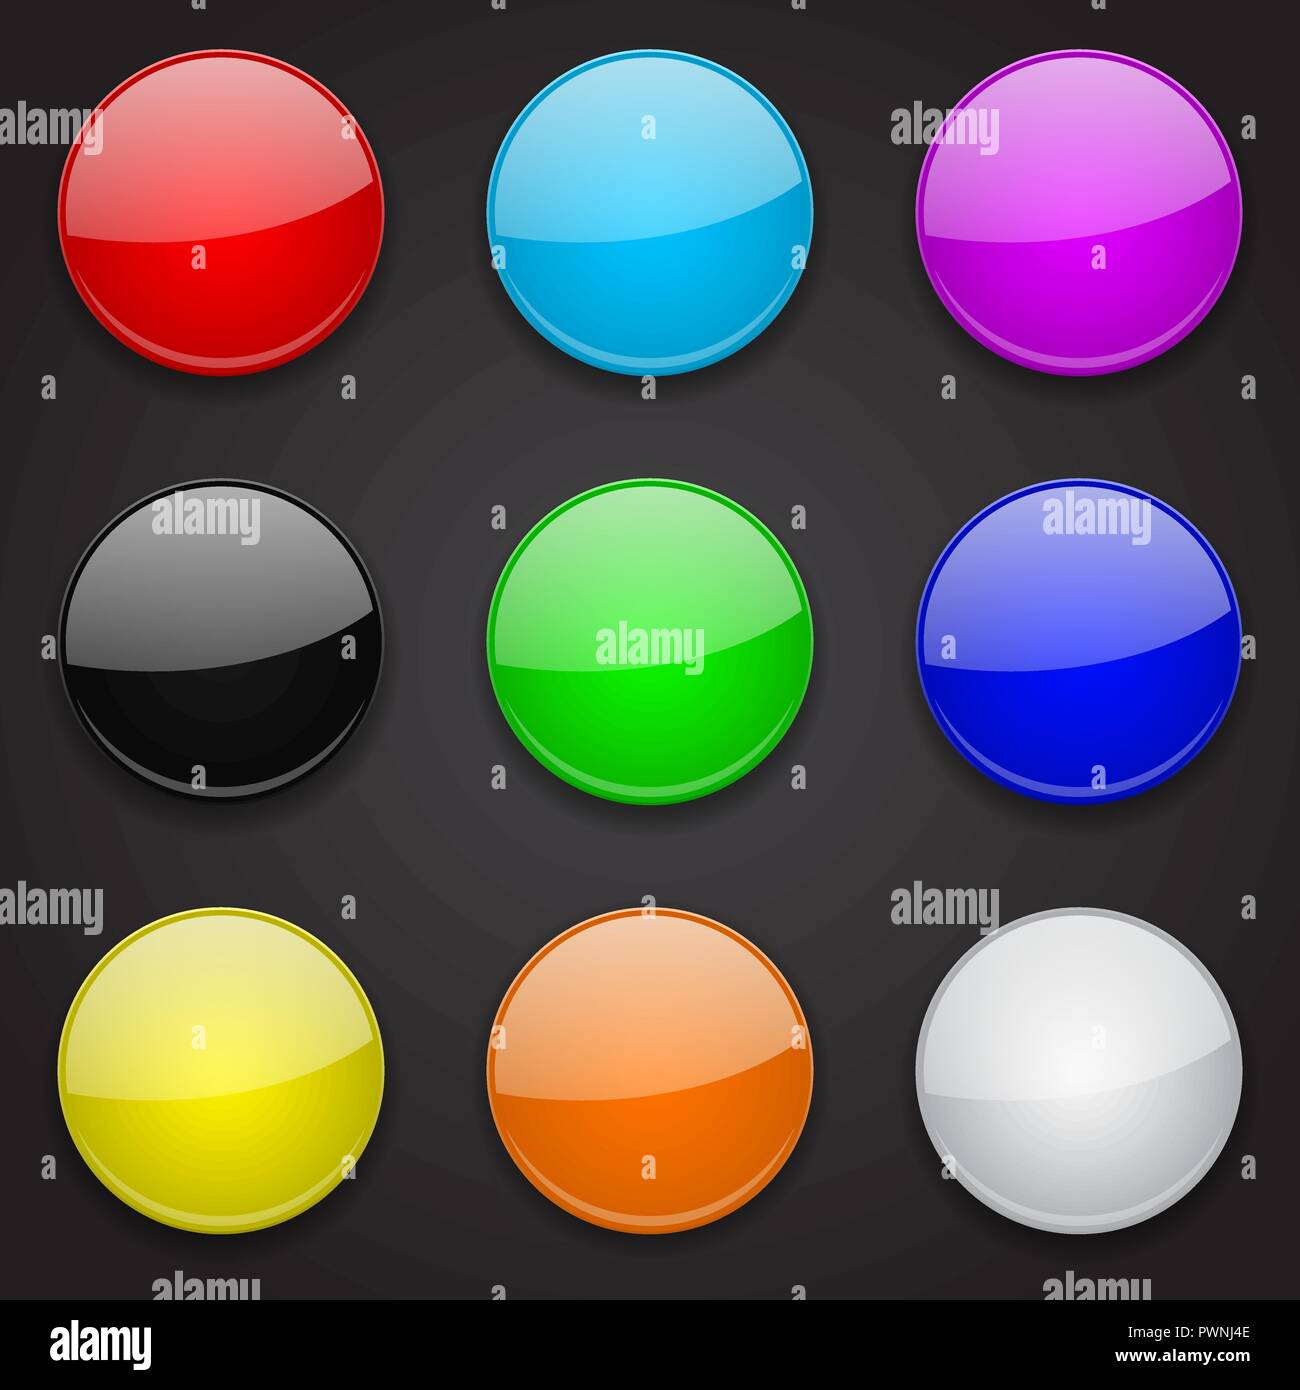 Colored glass 3d buttons. Round icons on black background Stock Vector